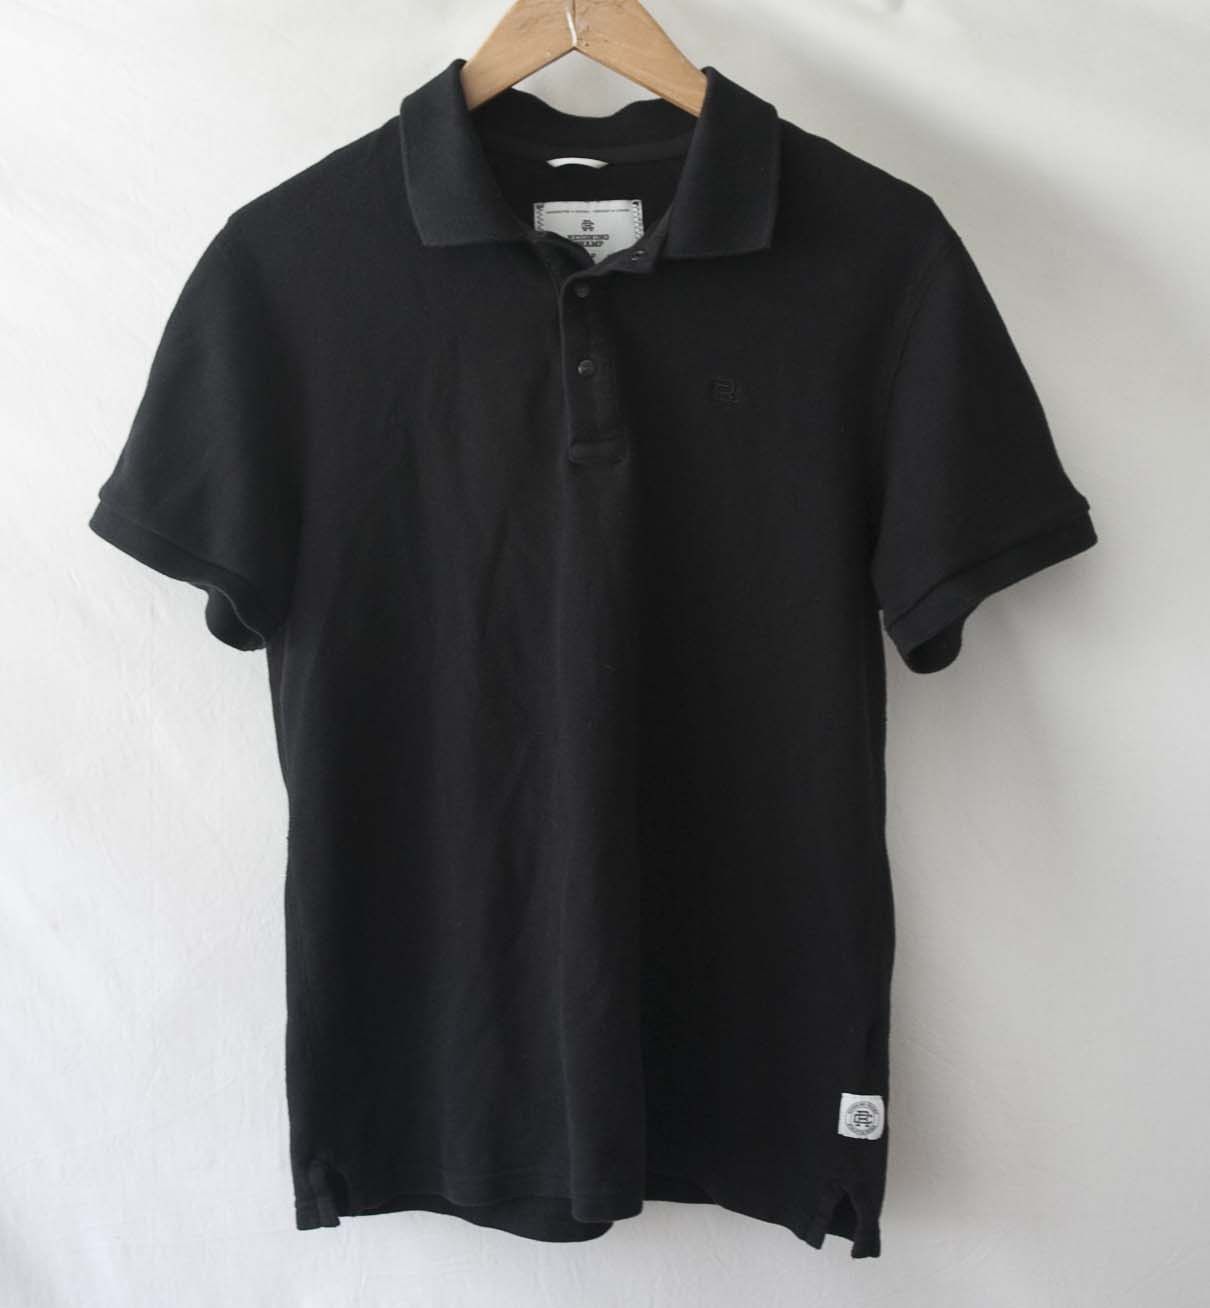 Reigning Champ * Reigning Champ Polo Black Size S | Grailed